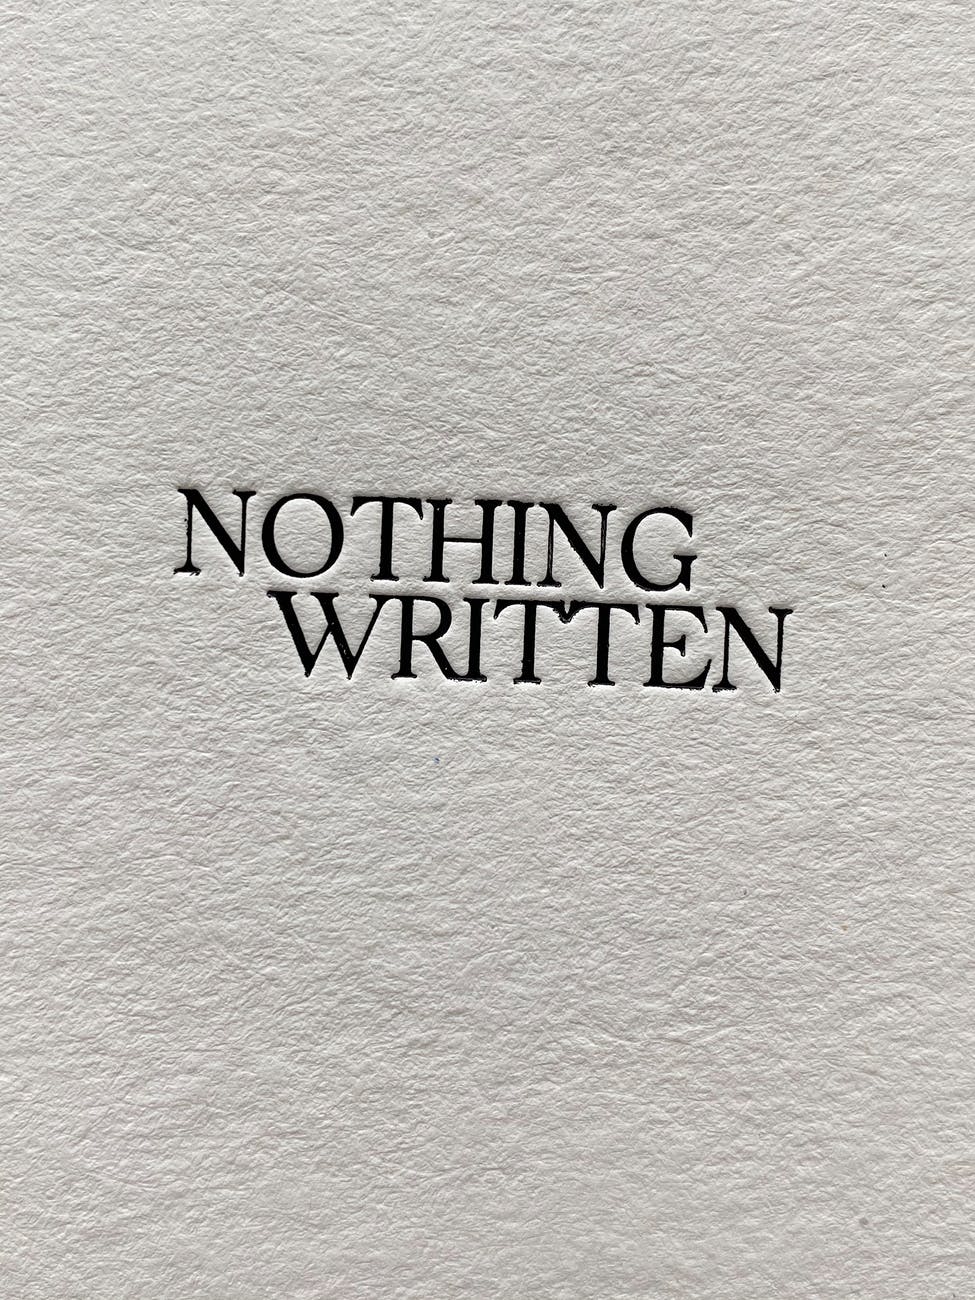 a blank sheet with the words nothing written typed on it.
Why should you write well